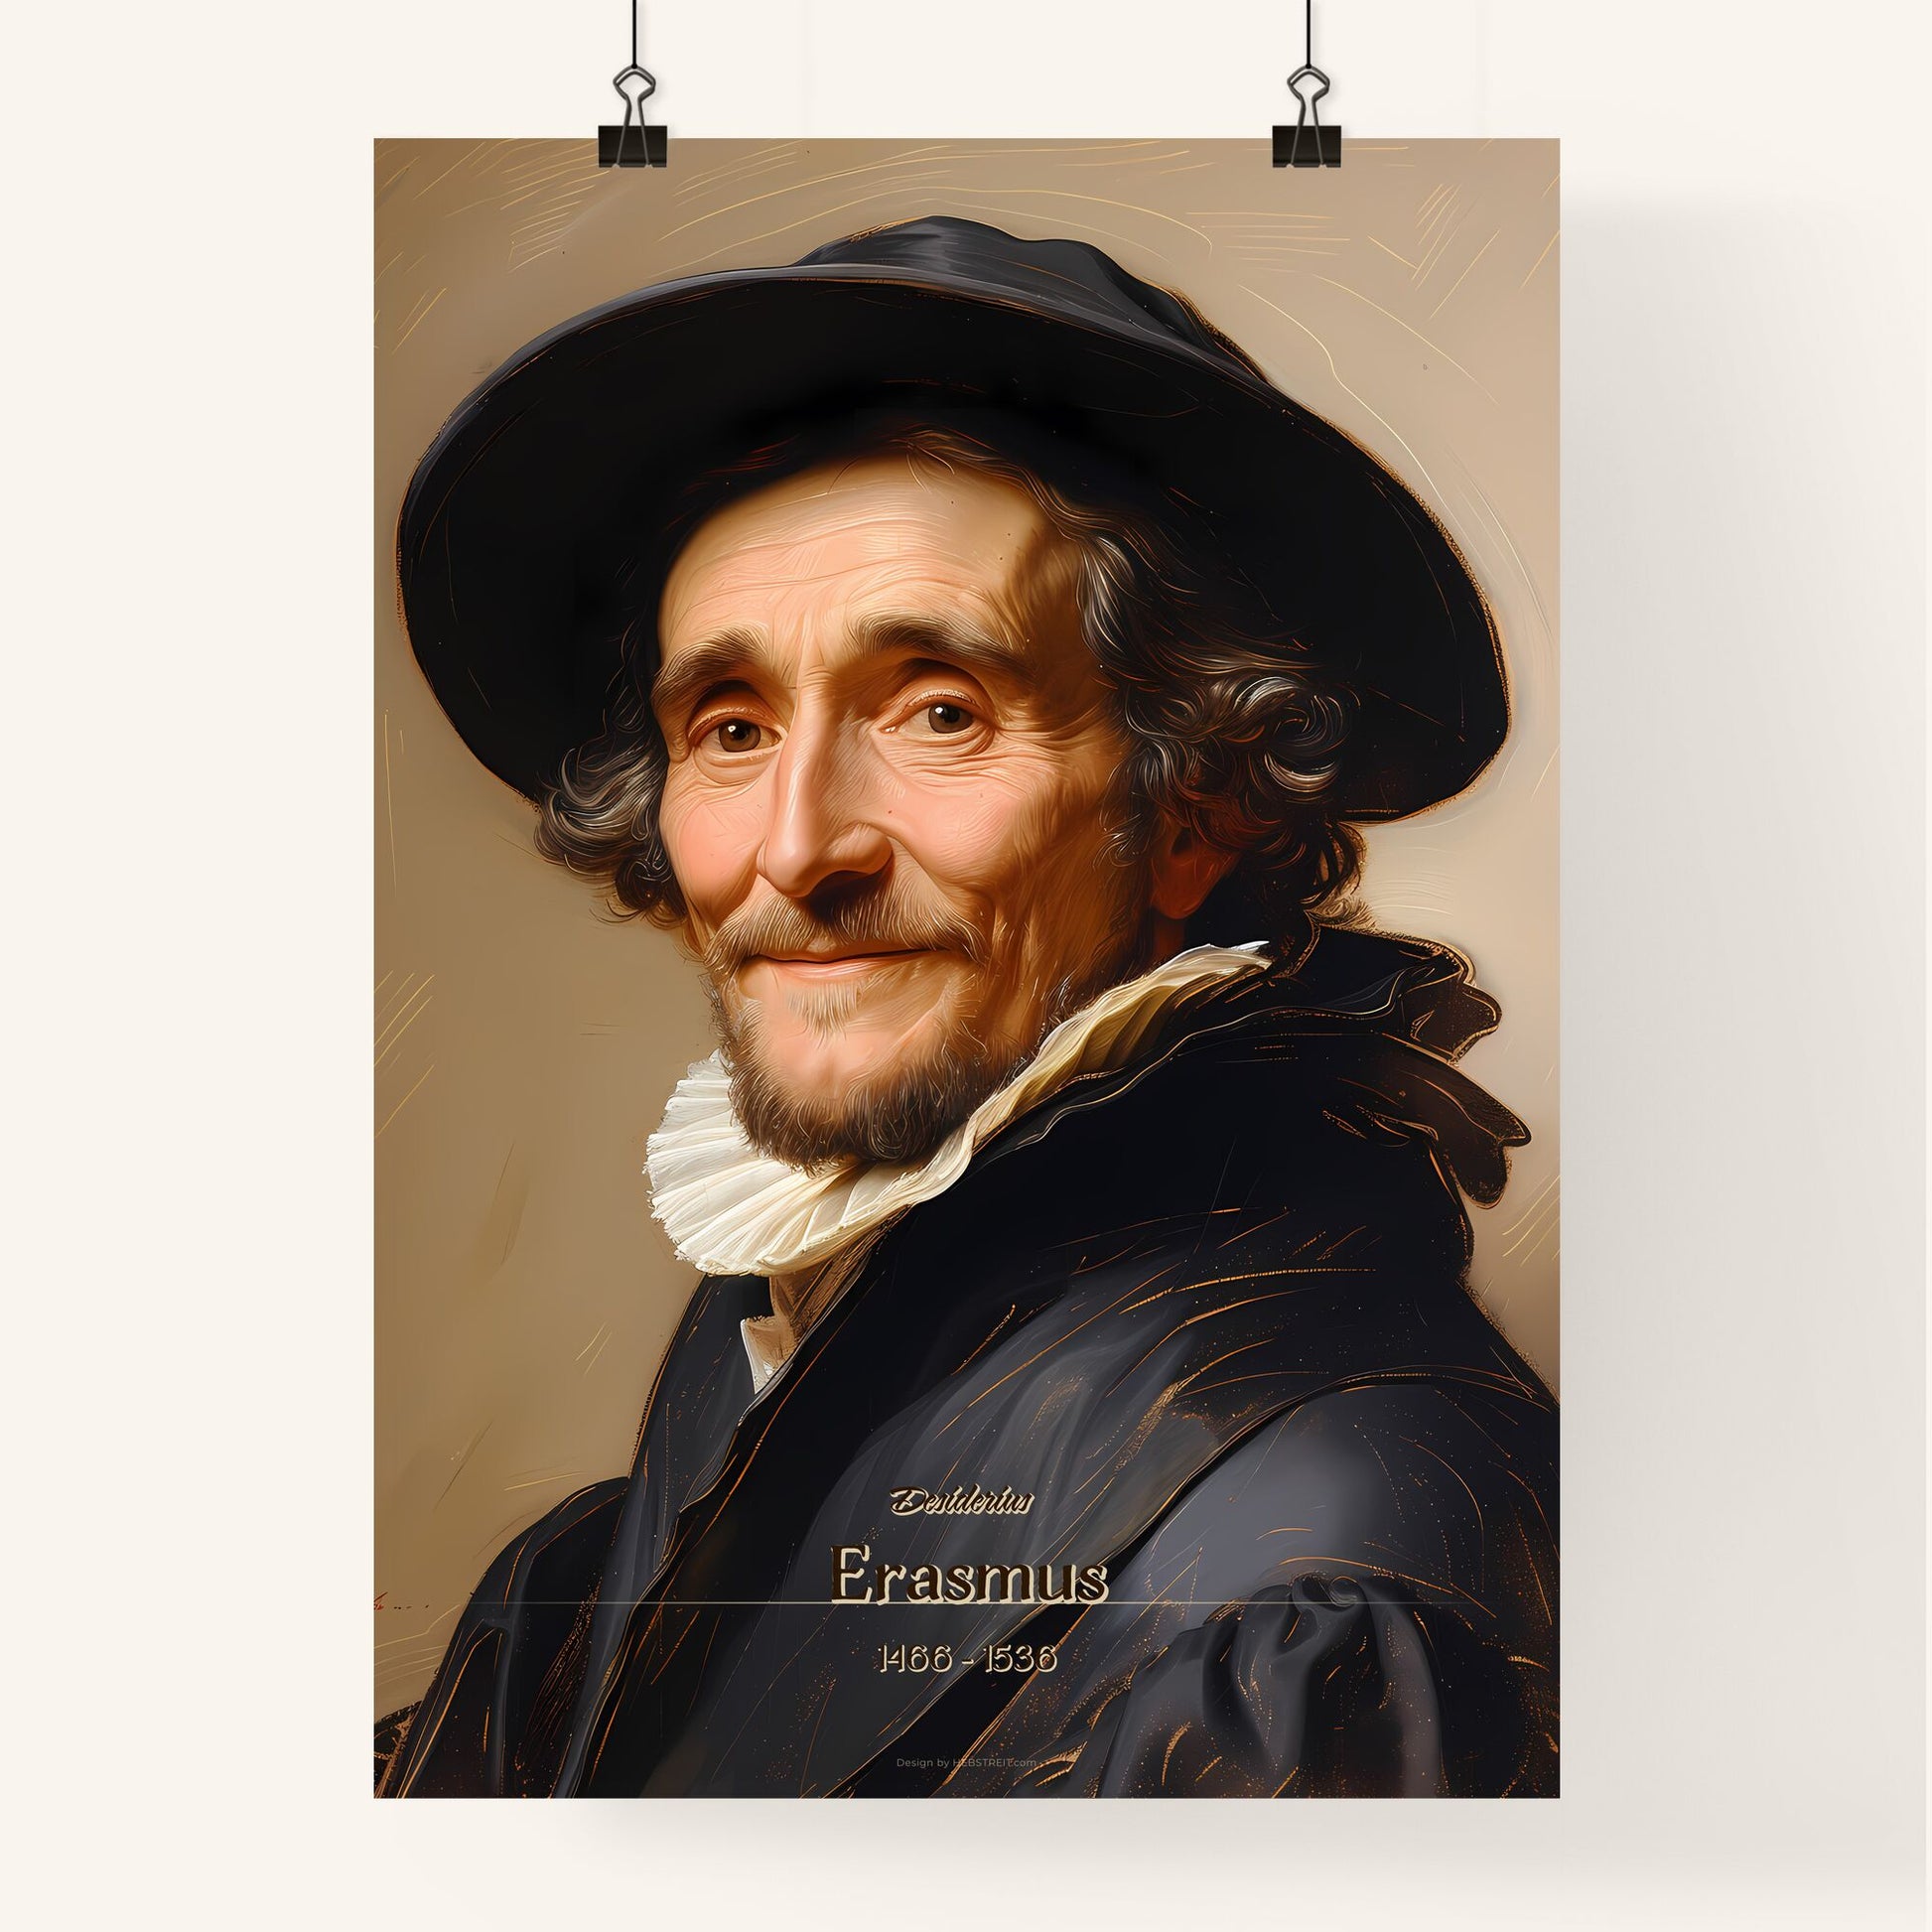 Desiderius, Erasmus, 1466 - 1536, A Poster of a man wearing a hat Default Title